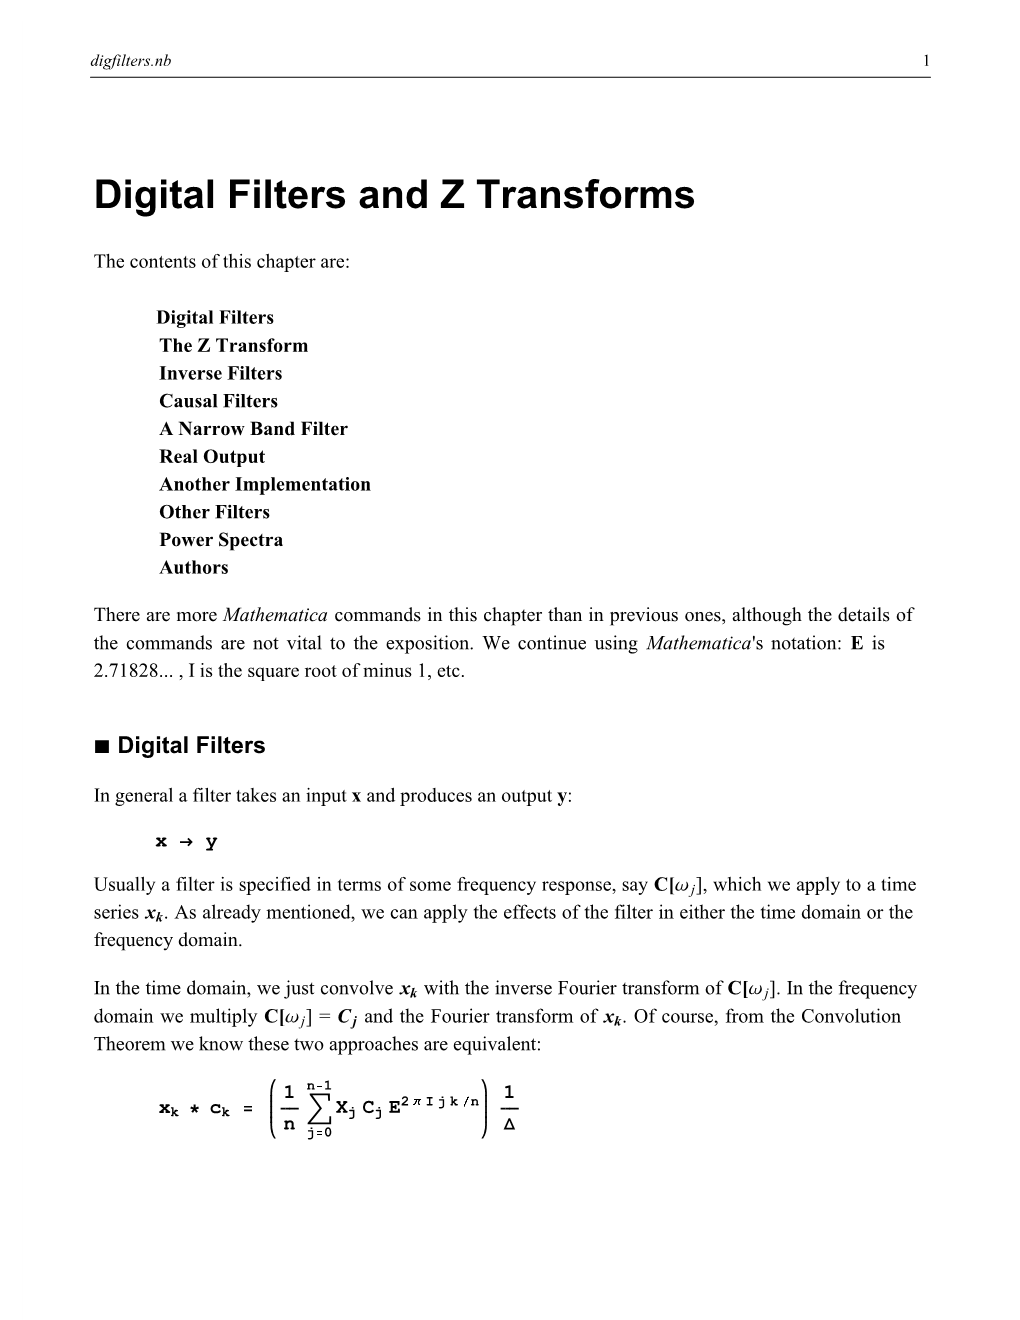 Digital Filters and Z Transforms